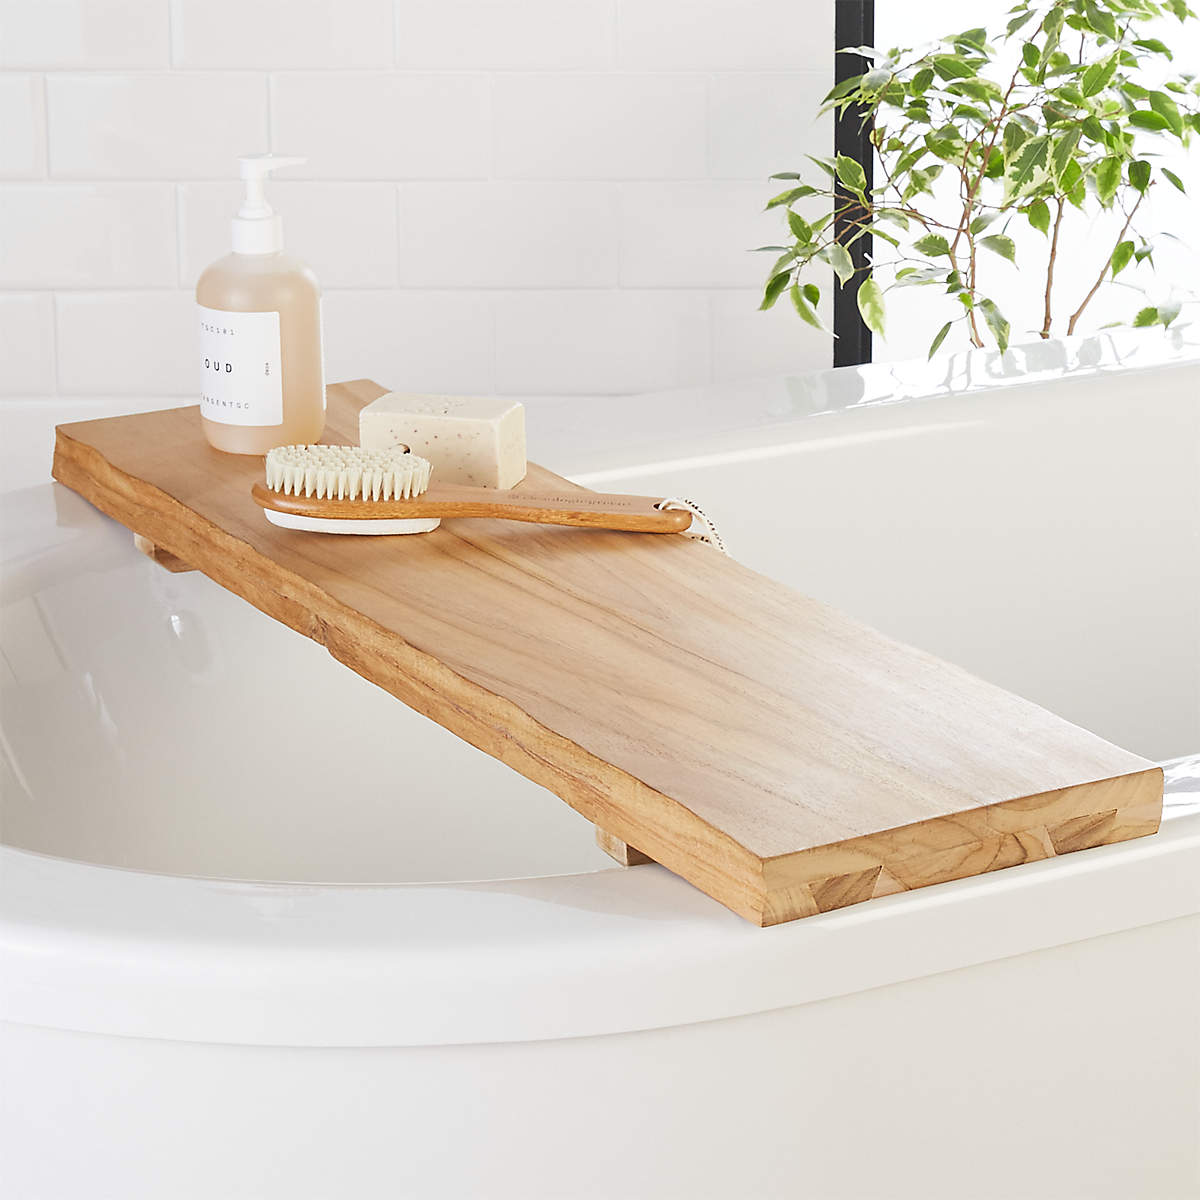 Relax with a Live Edge Bath Caddy